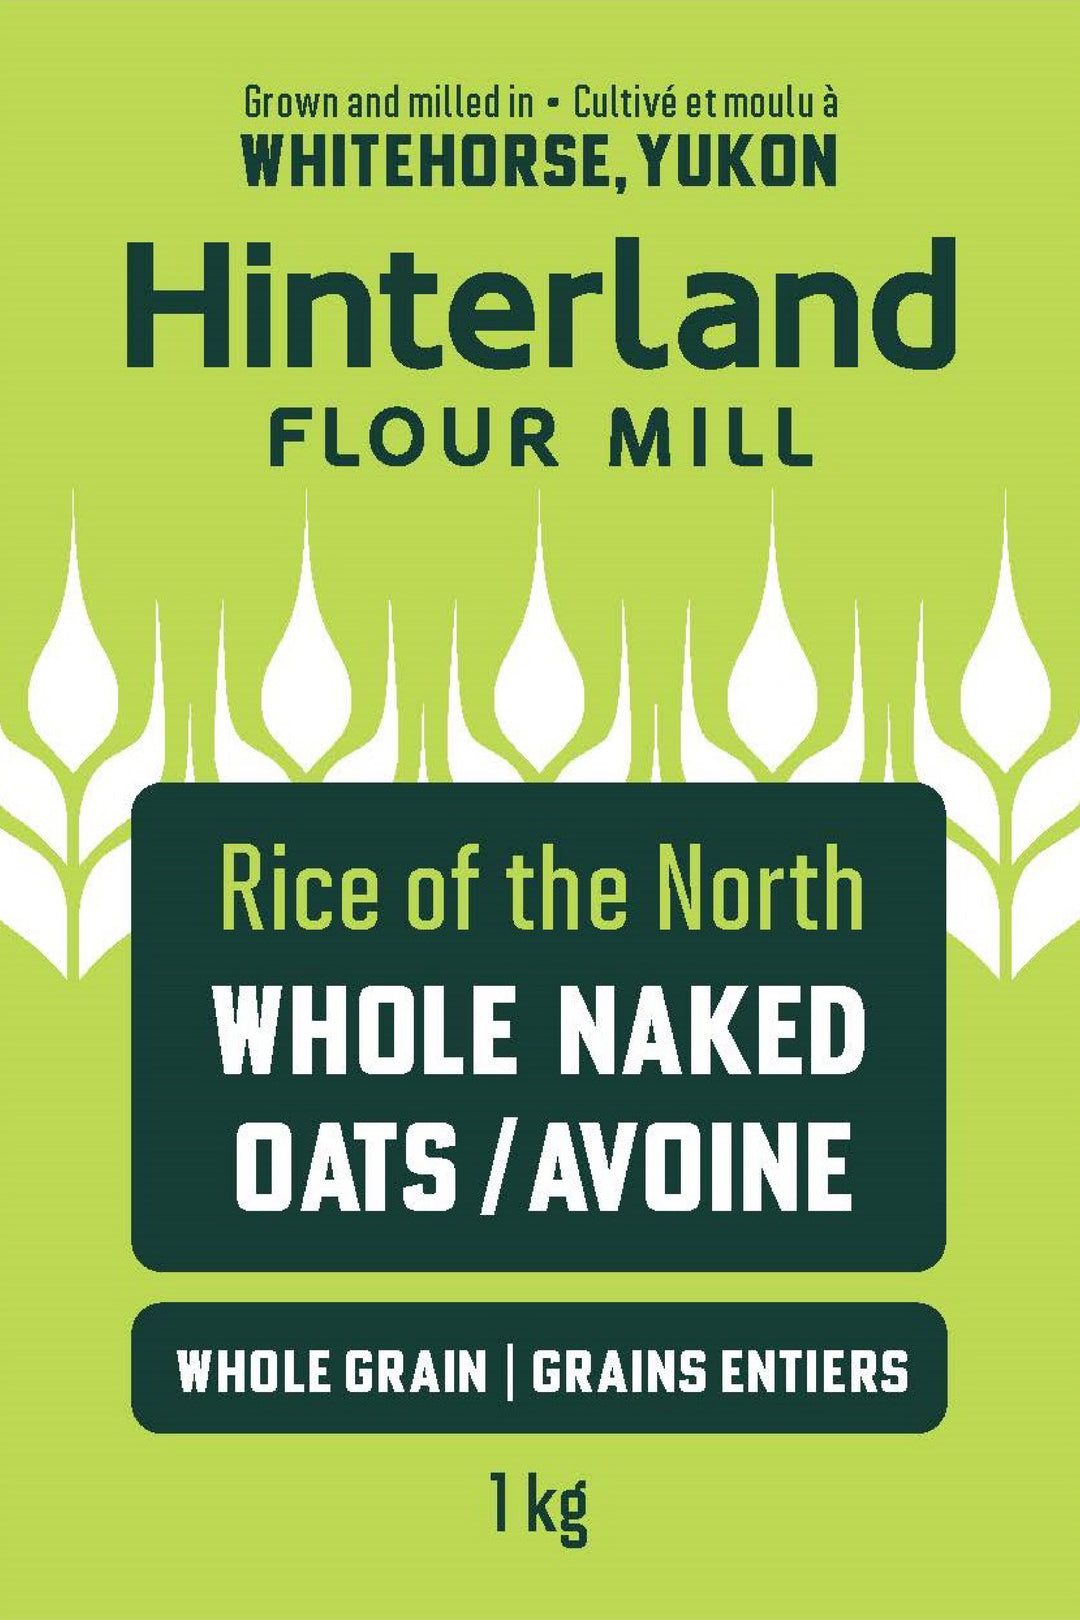 Rice of the North Whole Naked Oats